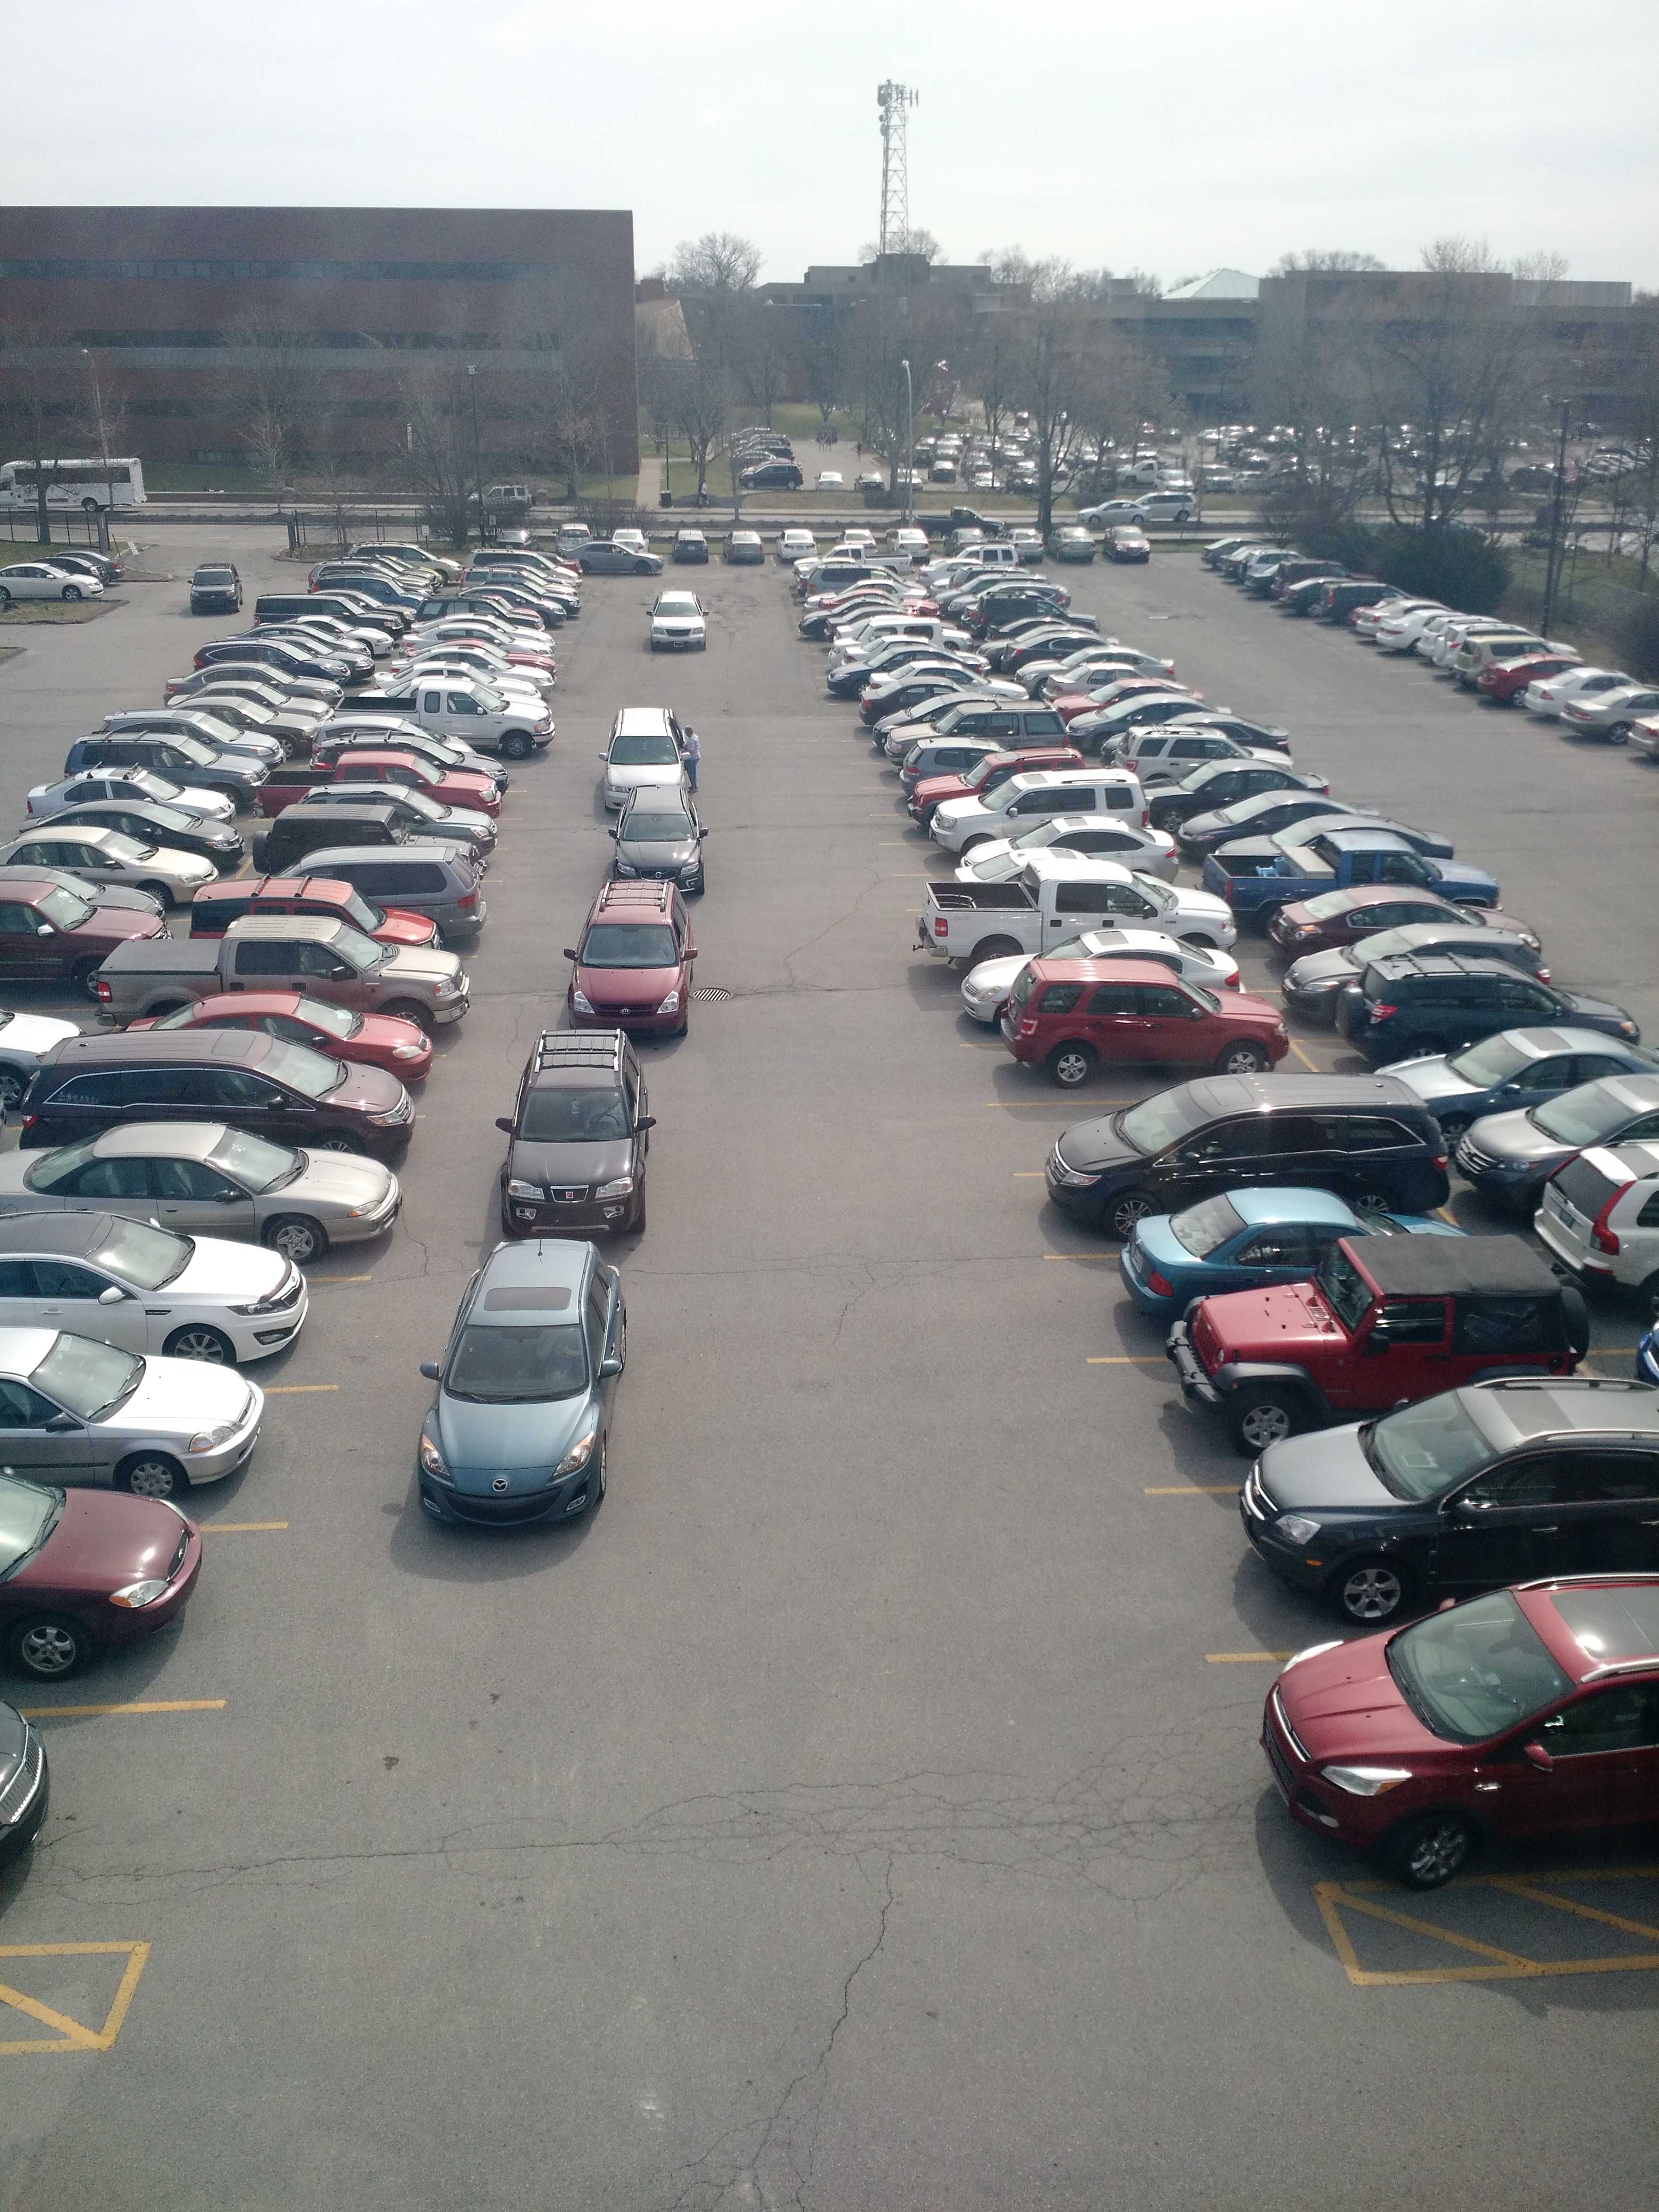 Manuals always full parking lot that seniors are taking advantage of the low gas prices. Photo by author.